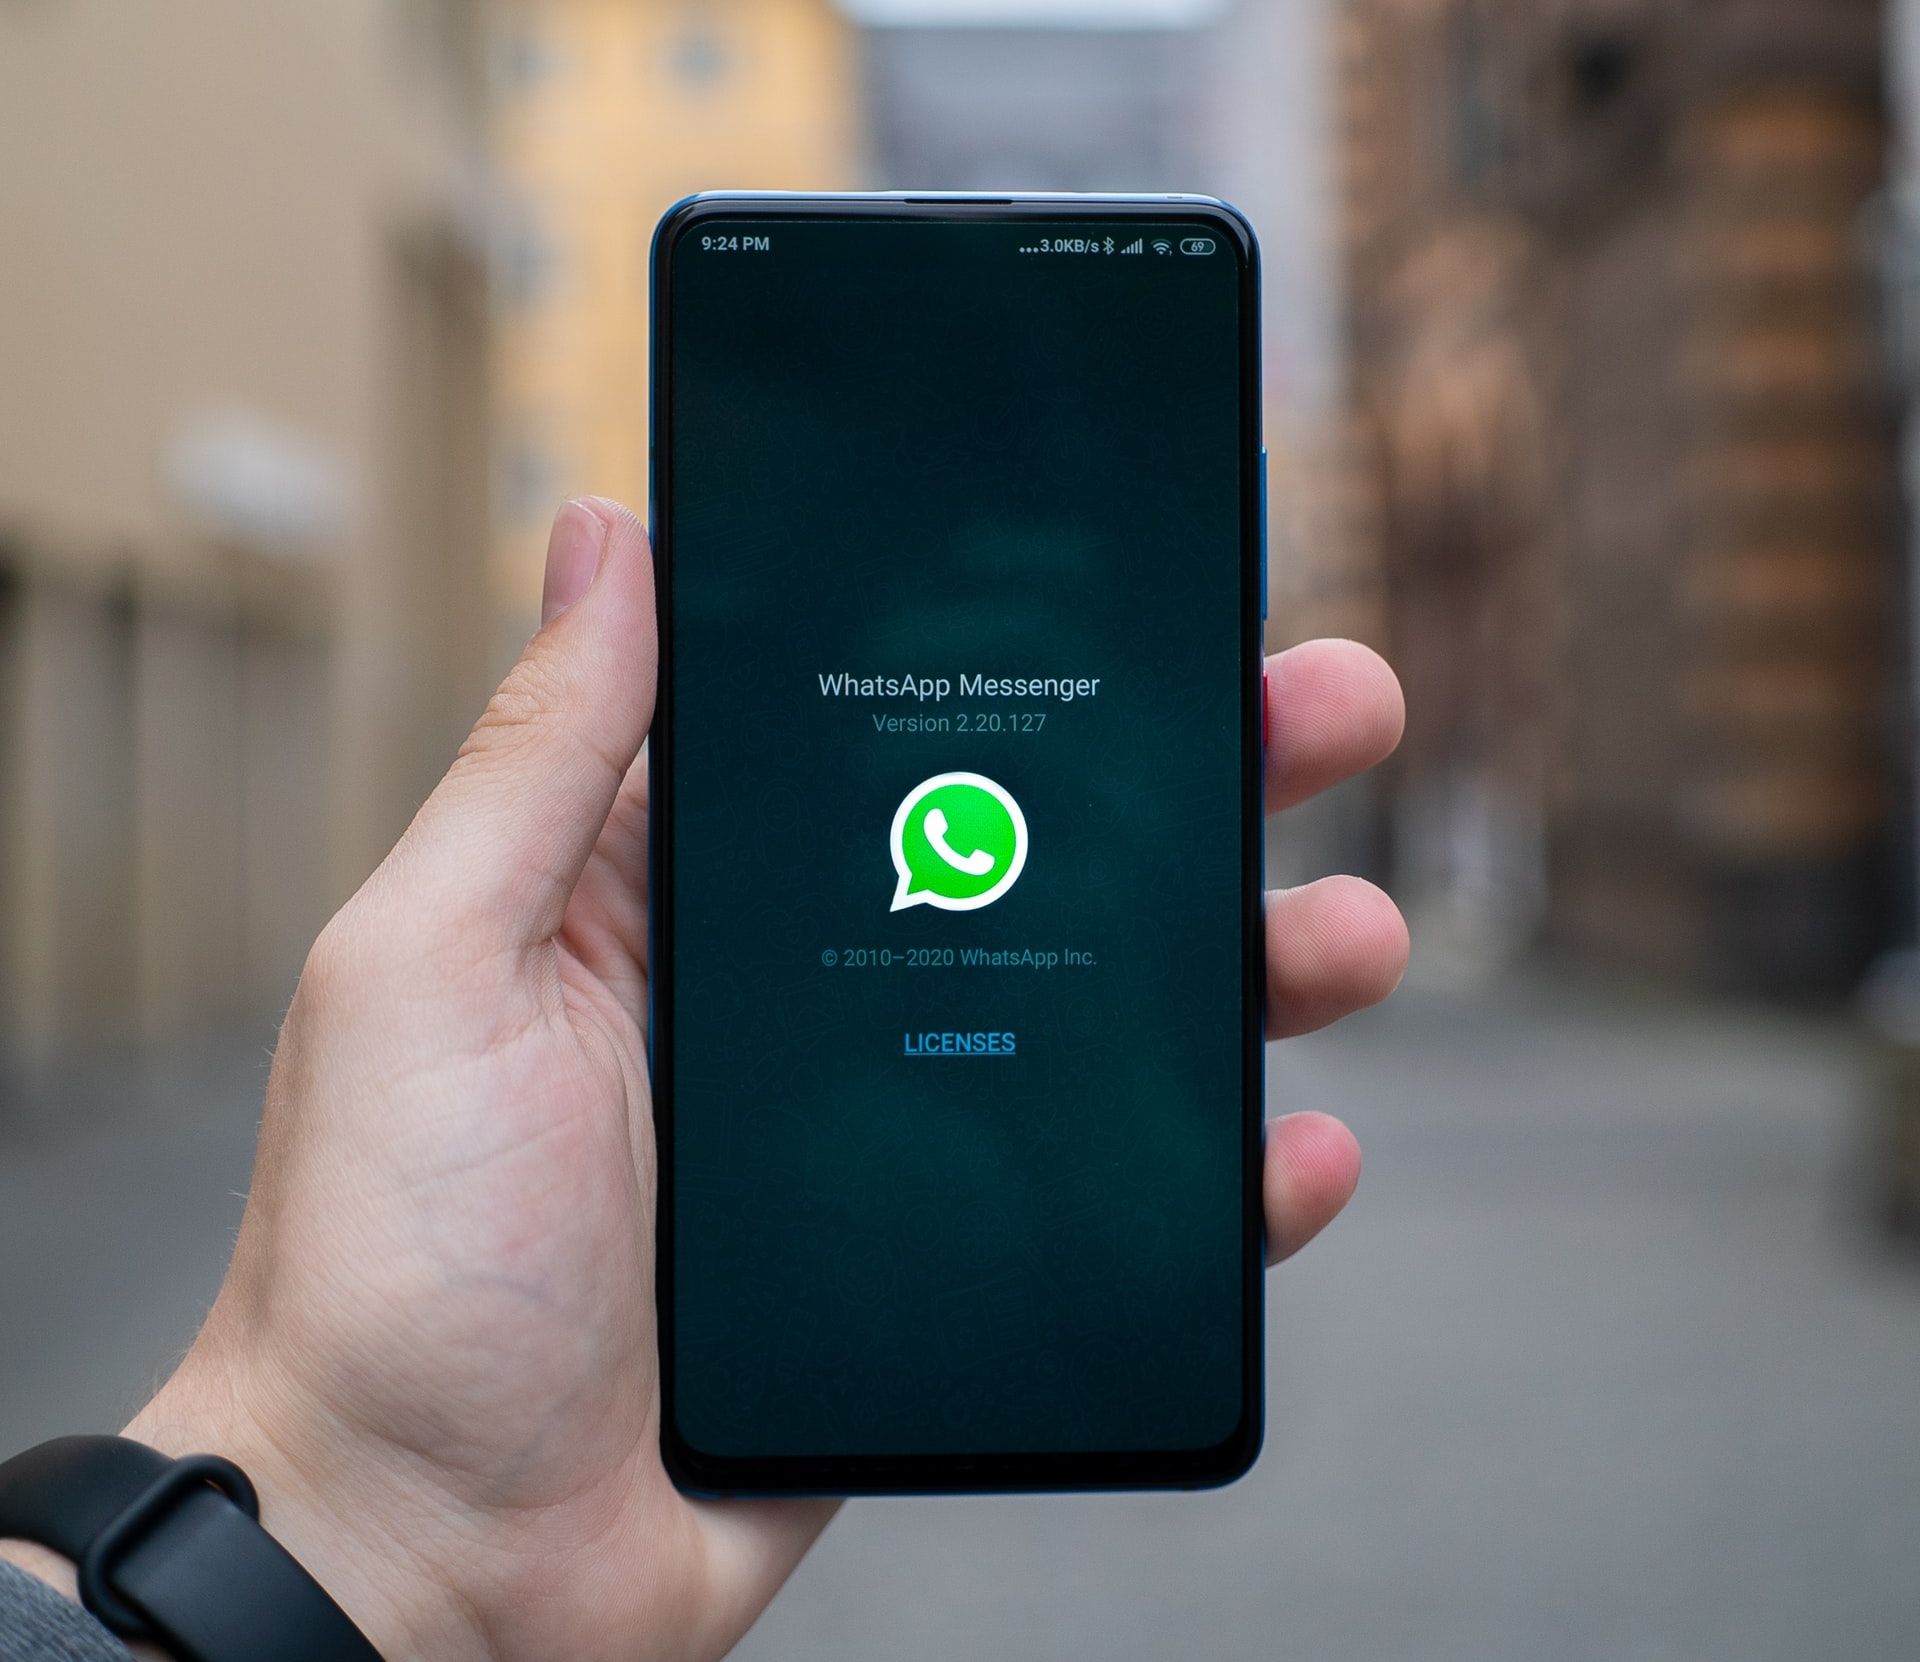 WhatsApp adds a highly requested feature: Messaging from multiple devices